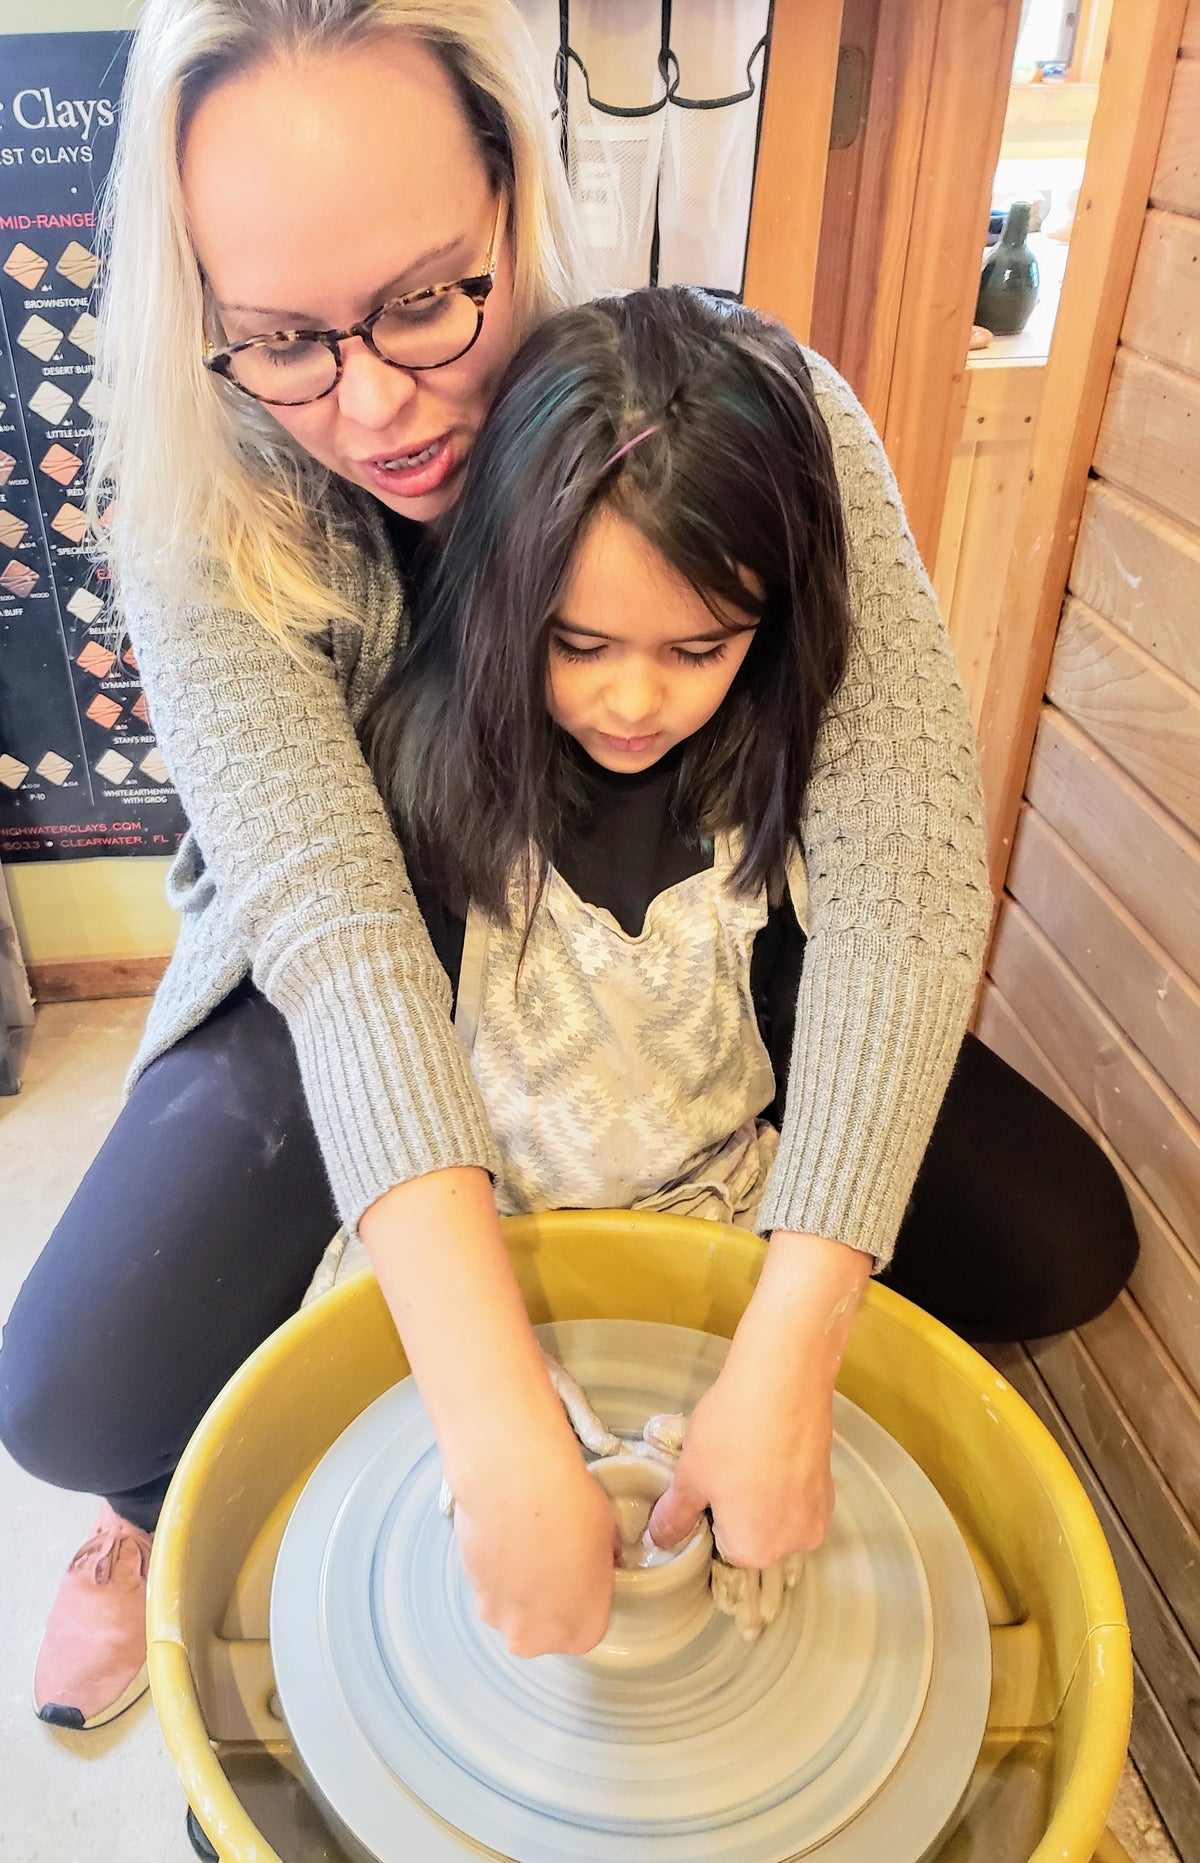 Why We Love this Kids Pottery Wheel - The Artful Parent